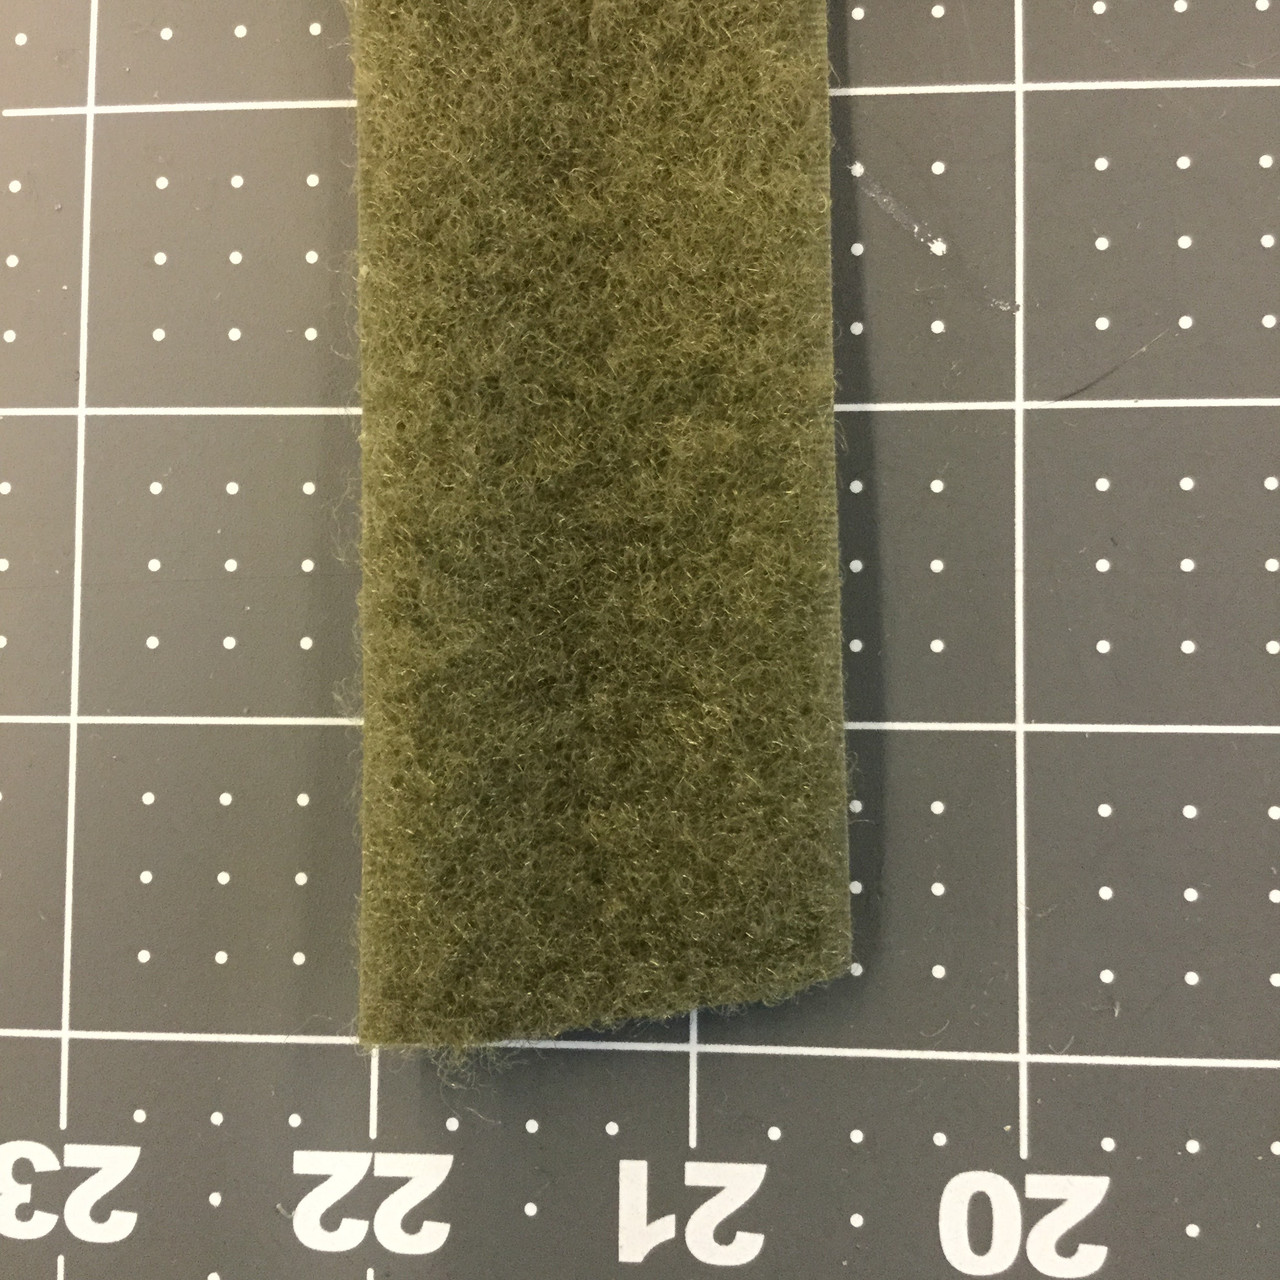 Loop Velcro Field ADD ON – Yellow Birch Outfitters